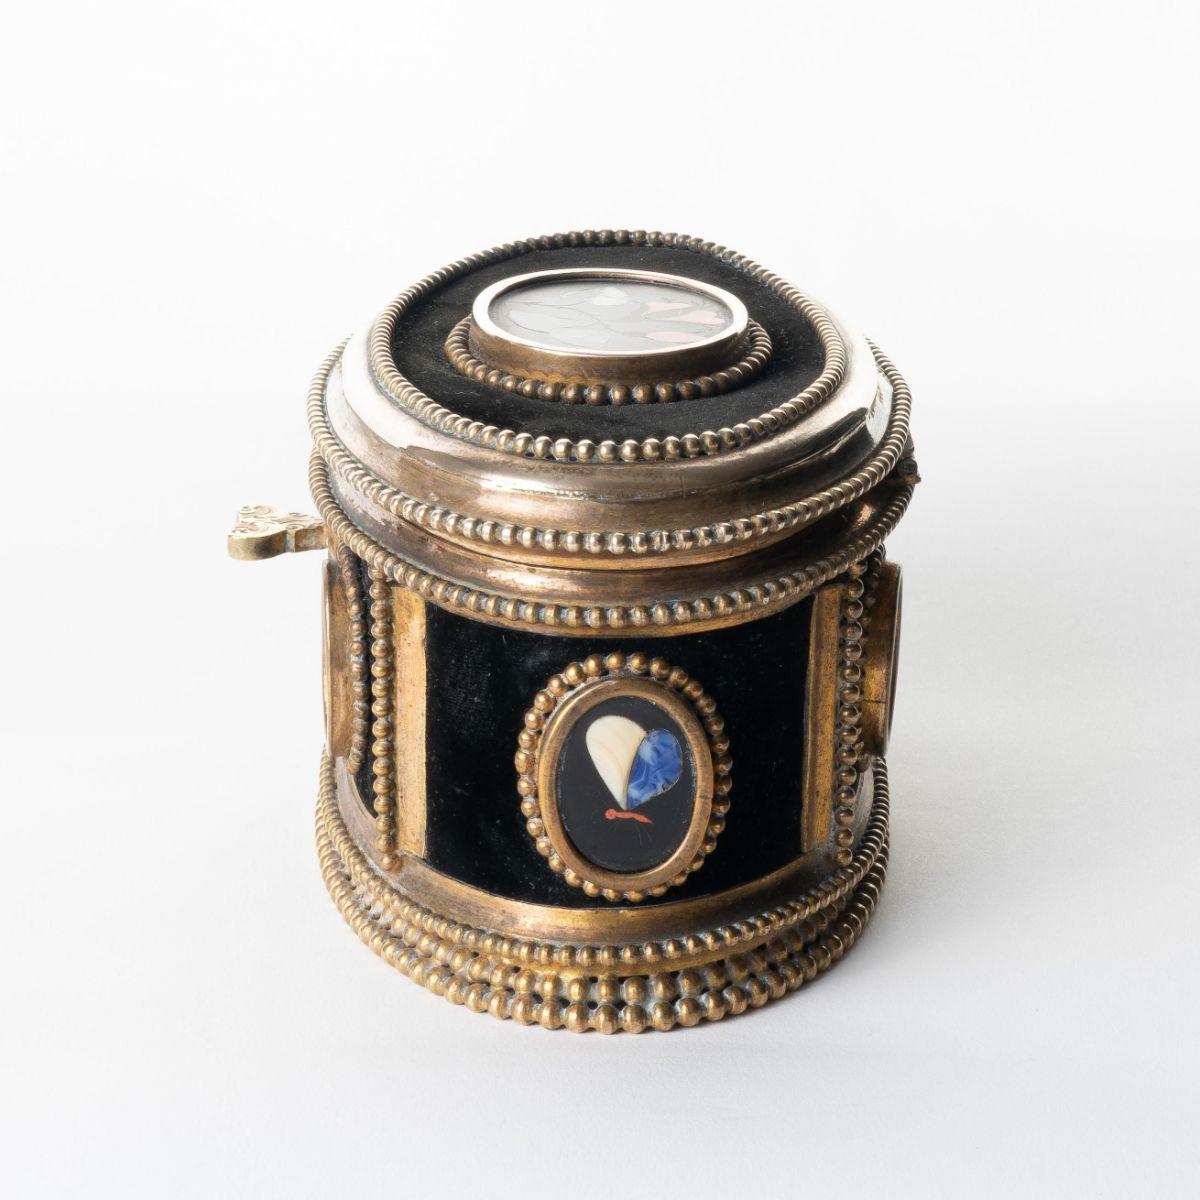 Italian jewelry cask in cast bronze with a beaded edge, oval framed, and set with pietra dura (cut & fitted) ovals of flowers & butterflies in oval beaded frames backed with black silk velvet. The hinged lid is keyed and opens to a blue silk velvet